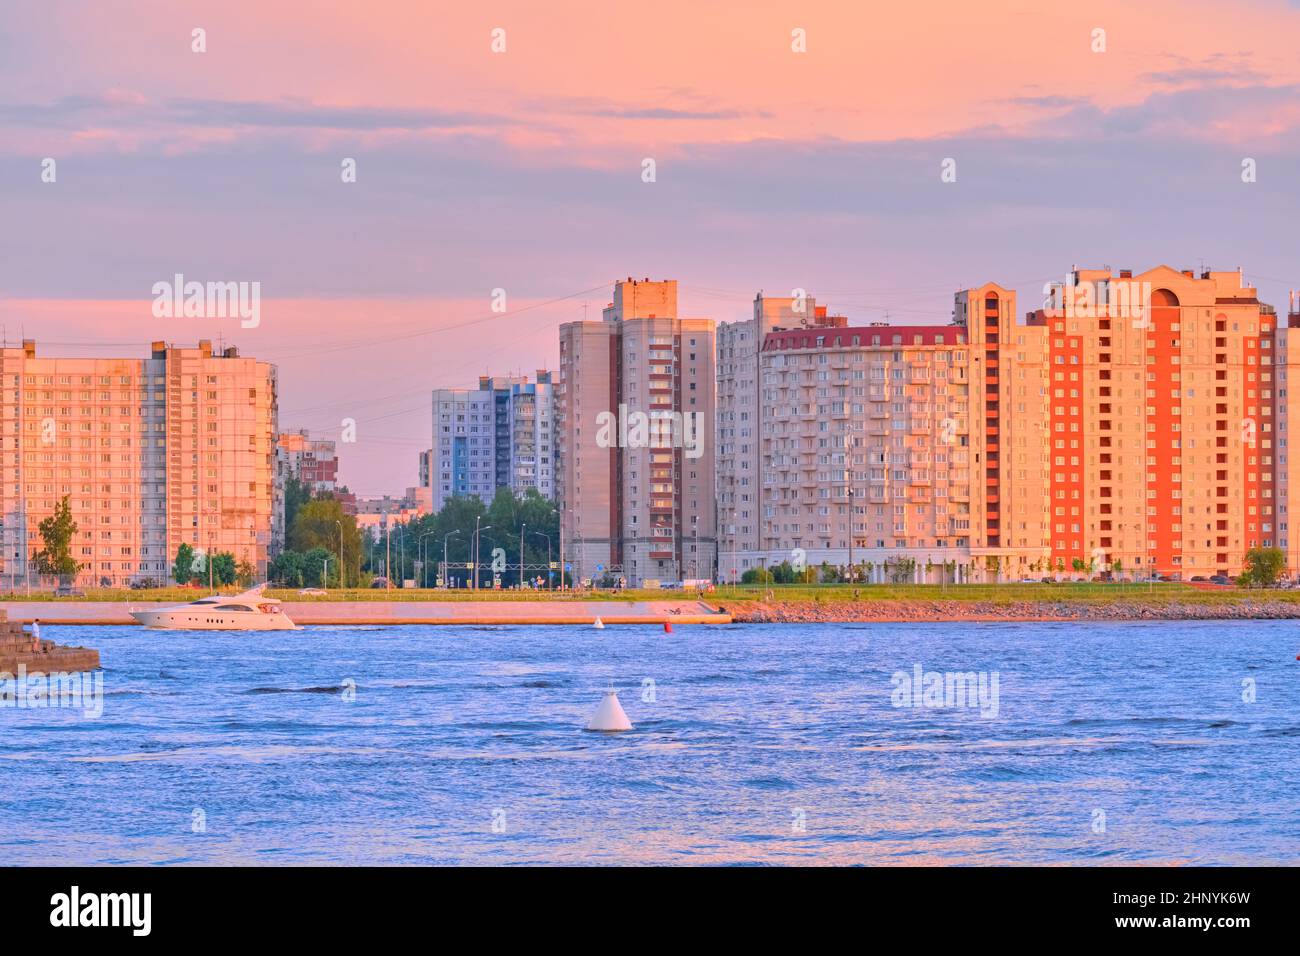 Saint-Petersburg, Russia - Jun 09, 2021: New houses in the Nevsky Bay area at sunset. Boats and boats move on the water Stock Photo